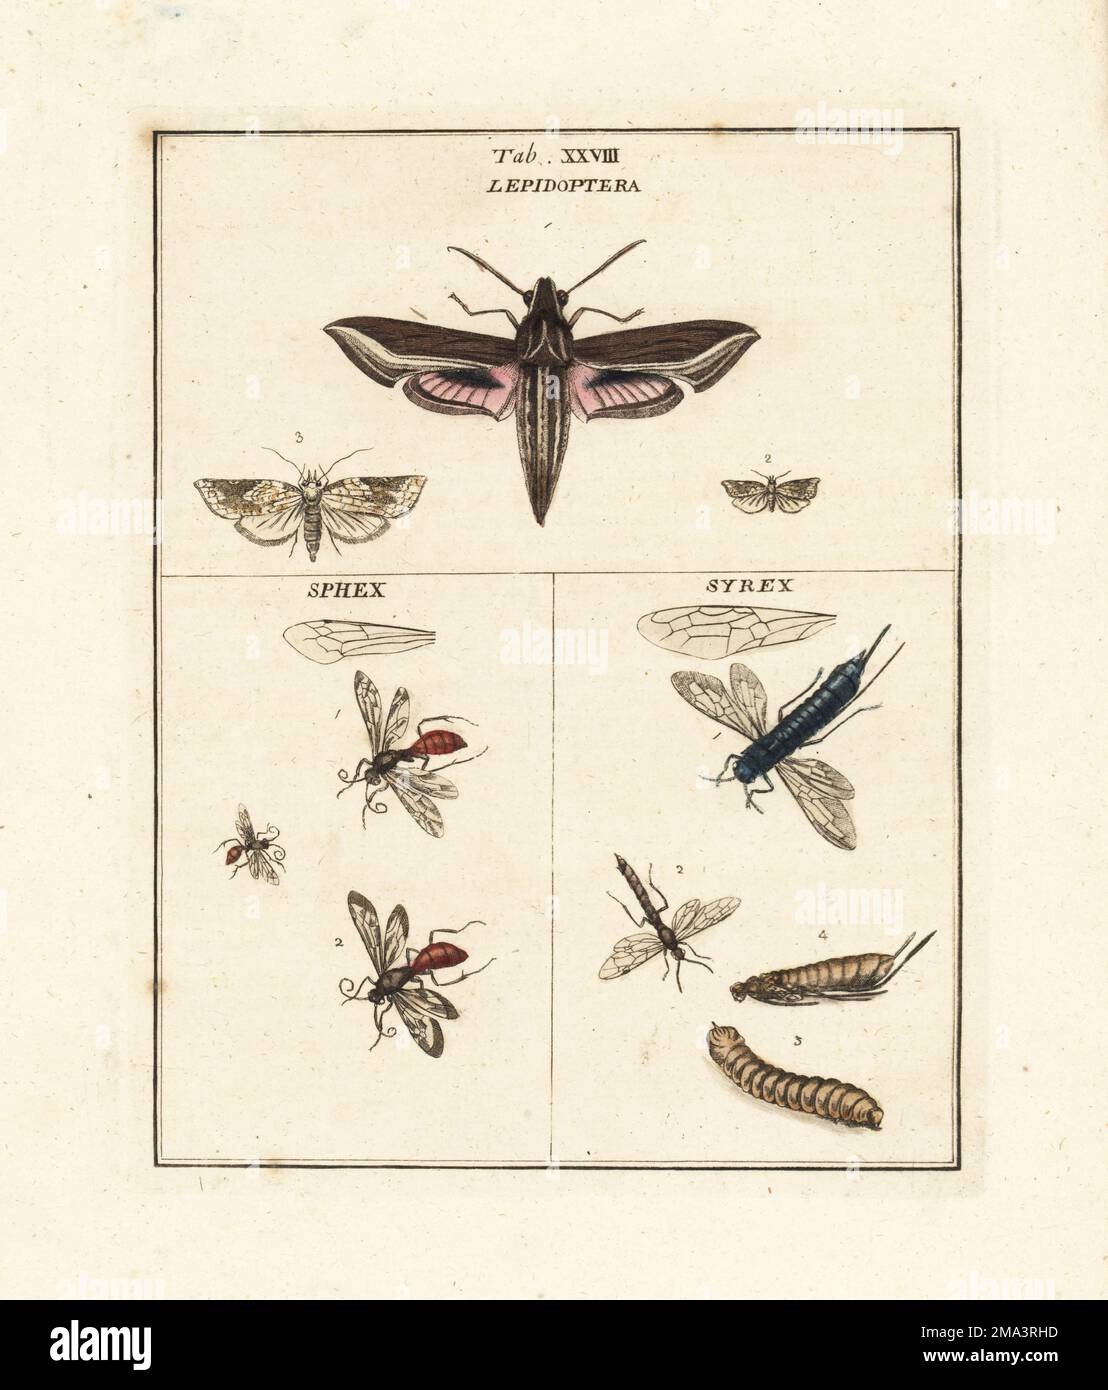 Vine hawk-moth or silver-striped hawk-moth, Hippotion celerio, digger wasps, Sphex species, and horntails or wood wasps, Sirex species. Lepidoptera. Handcoloured copperplate engraving drawn and engraved by Moses Harris from his own Exposition of English Insects, Including the several Classes of Neuroptera, Hymenoptera, Diptera, or Bees, Flies and Libellulae, White and Robson, London, 1782. Stock Photo